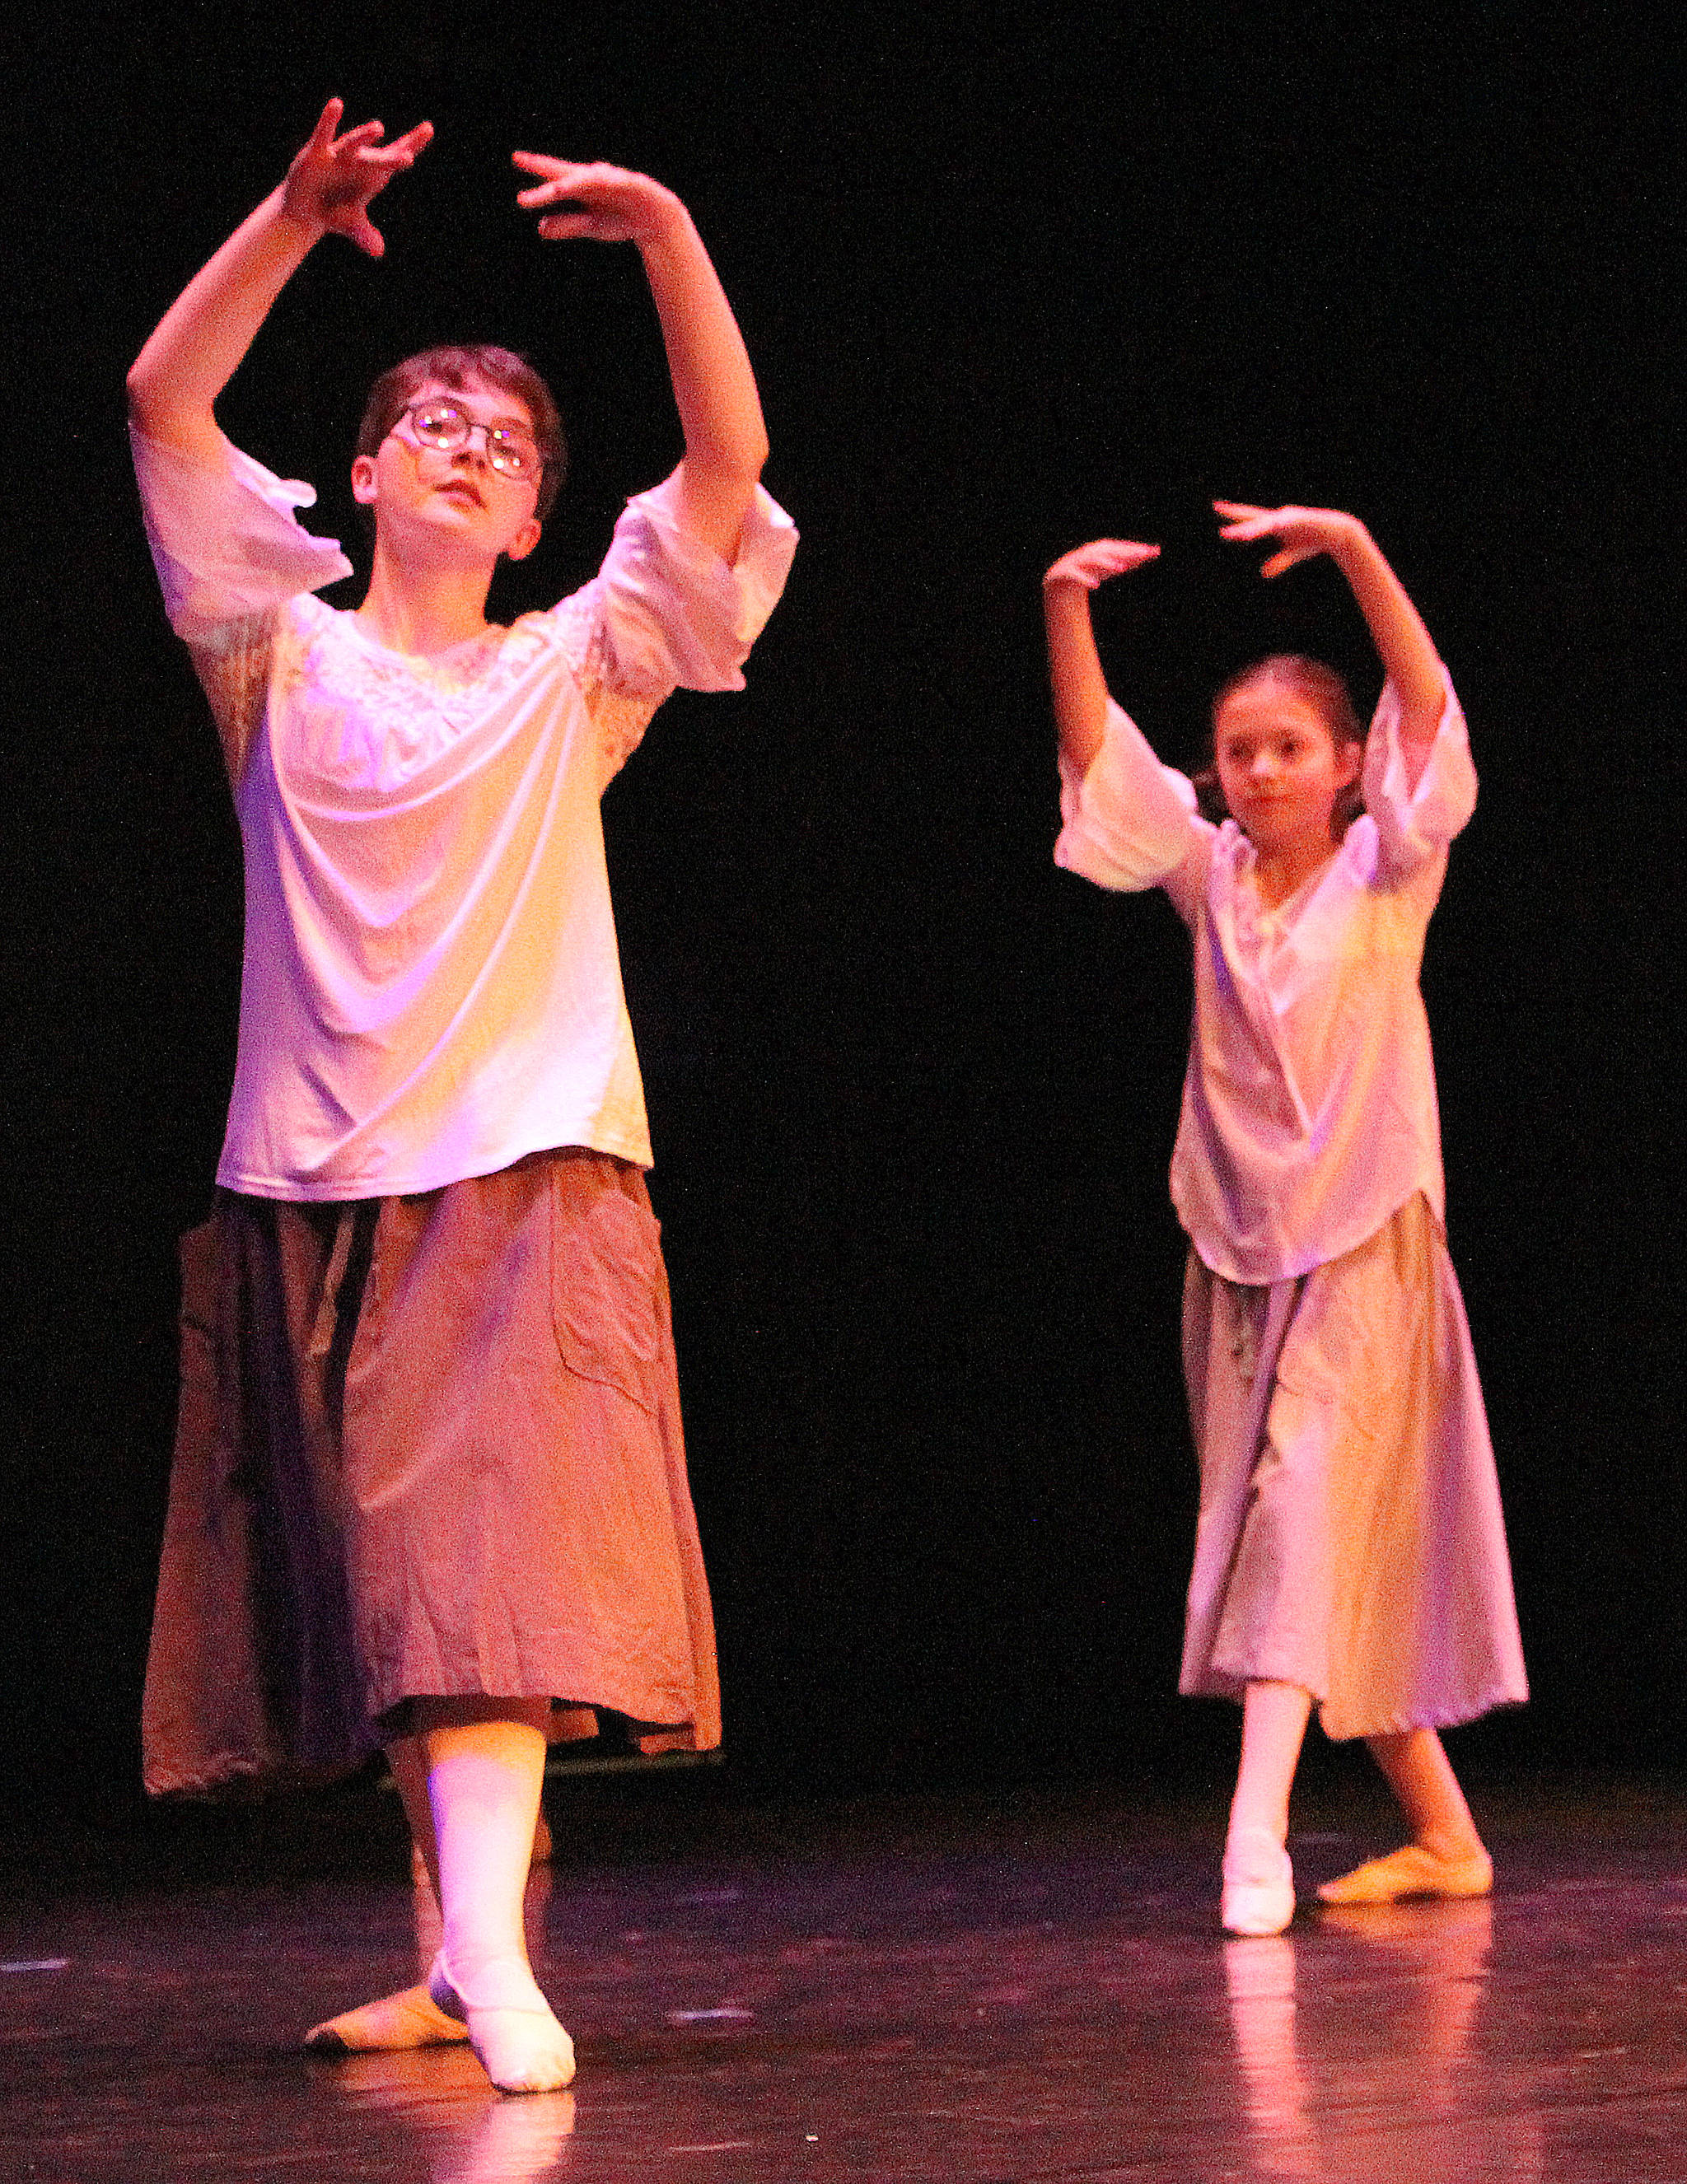 Young dancers share their hard work with community